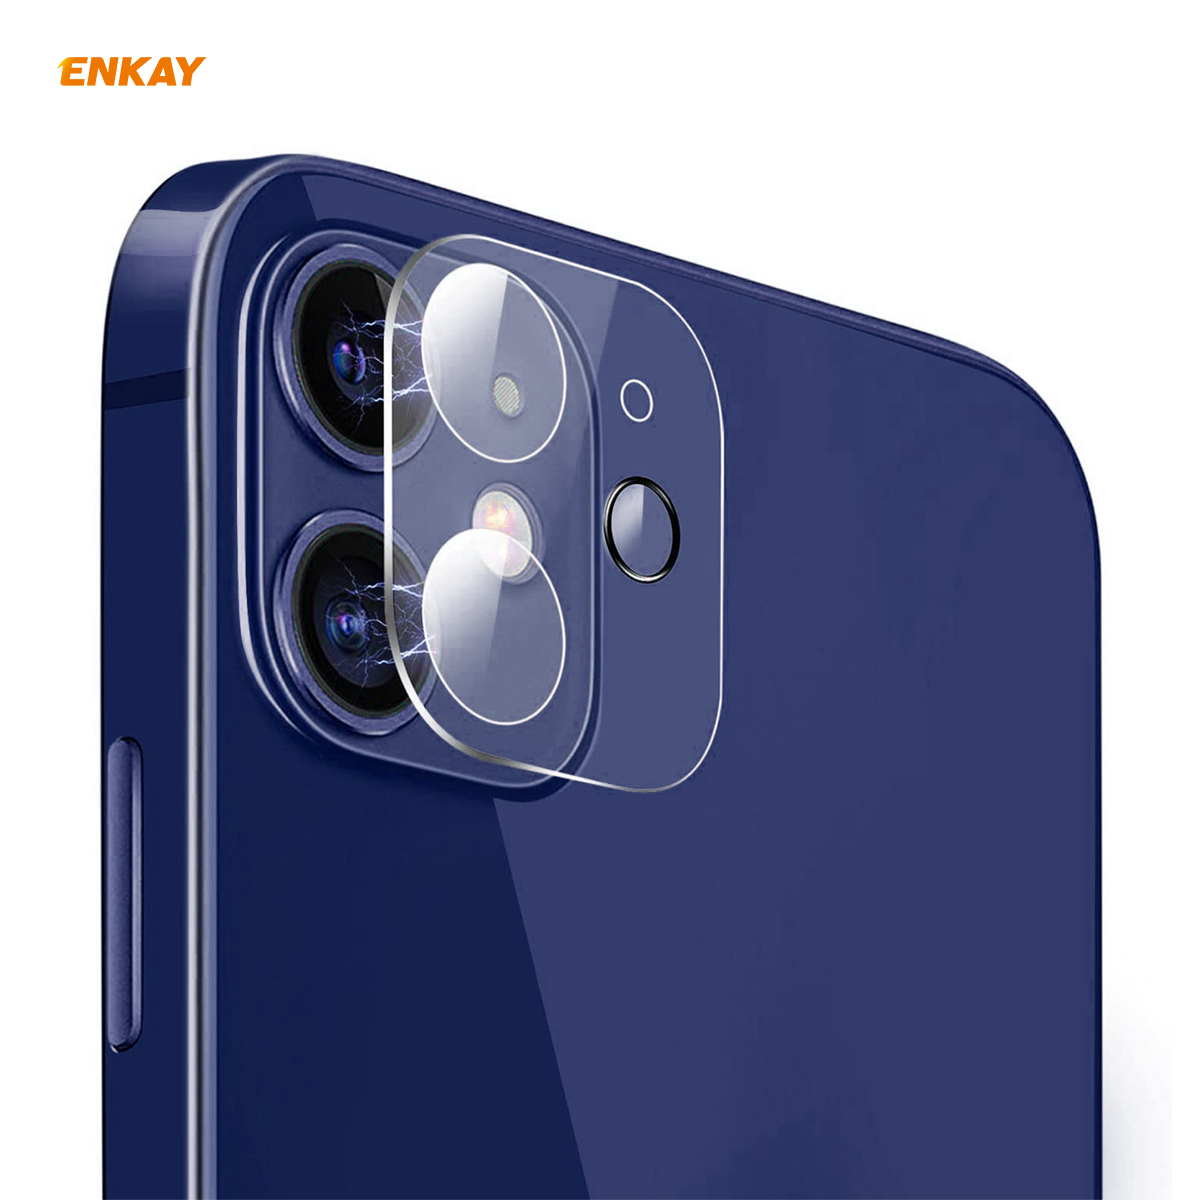 ENKAY-for-iPhone-12-3D-Anti-Scratch-Ultra-Thin-HD-Clear-Soft-Tempered-Glass-Phone-Camera-Lens-Protec-1784342-1